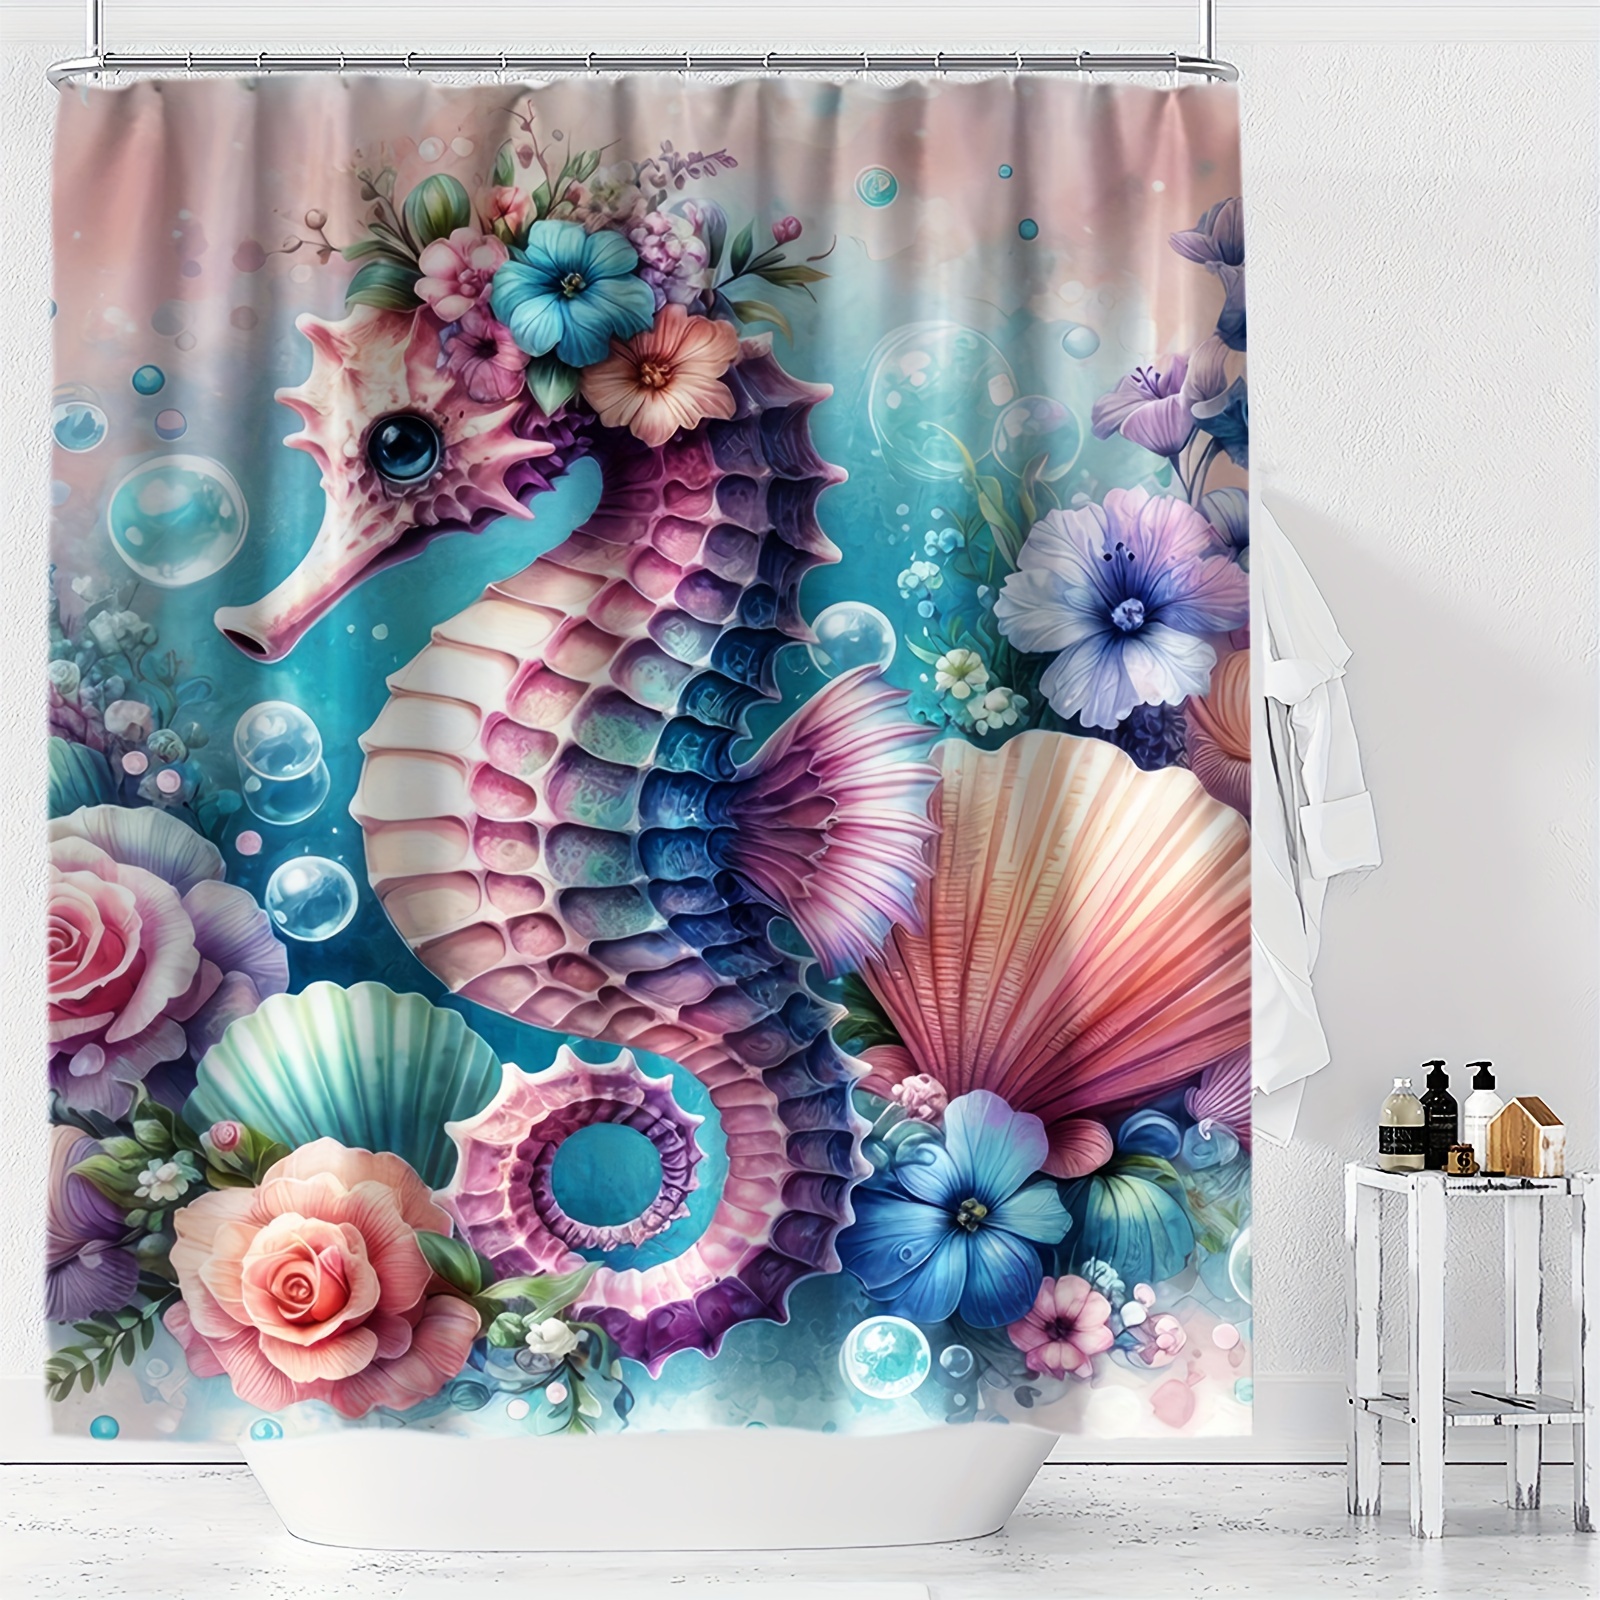 

Seahorse & Floral Print Shower Curtain - Waterproof, Machine Washable With Hooks Included - Perfect For All Seasons